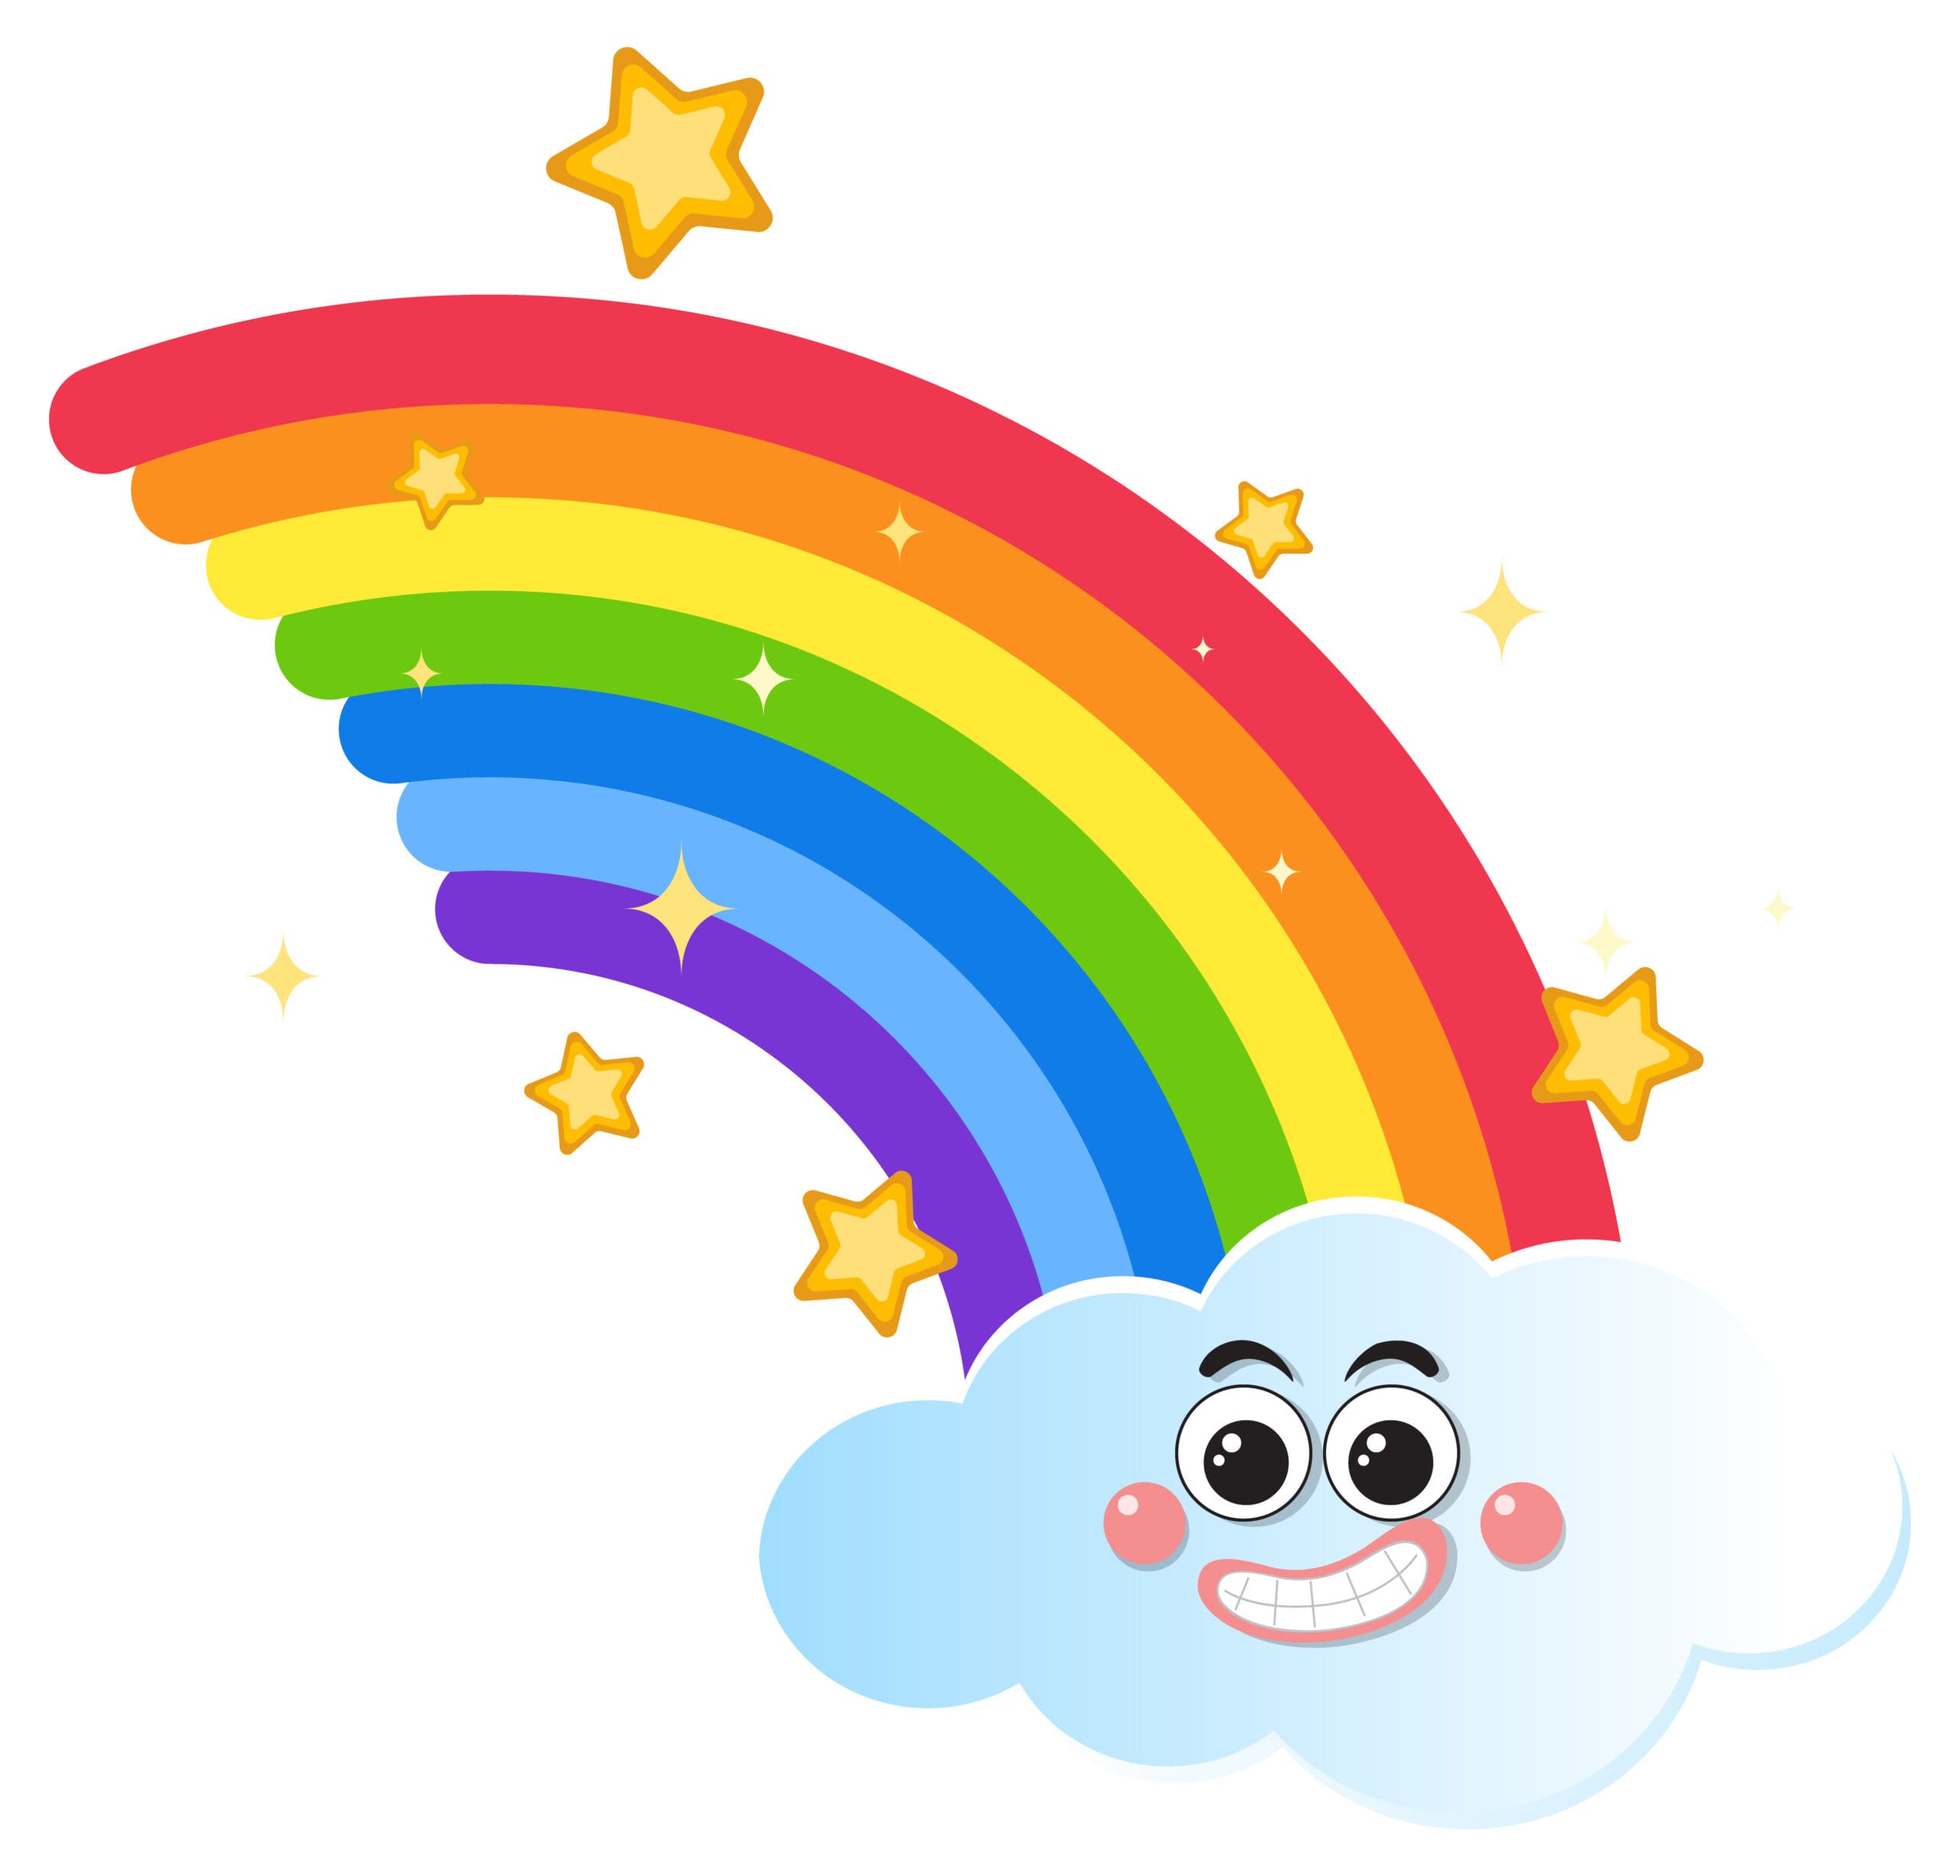 Cartoon graphic of a cheerful rainbow waving goodbye on a colorful background.